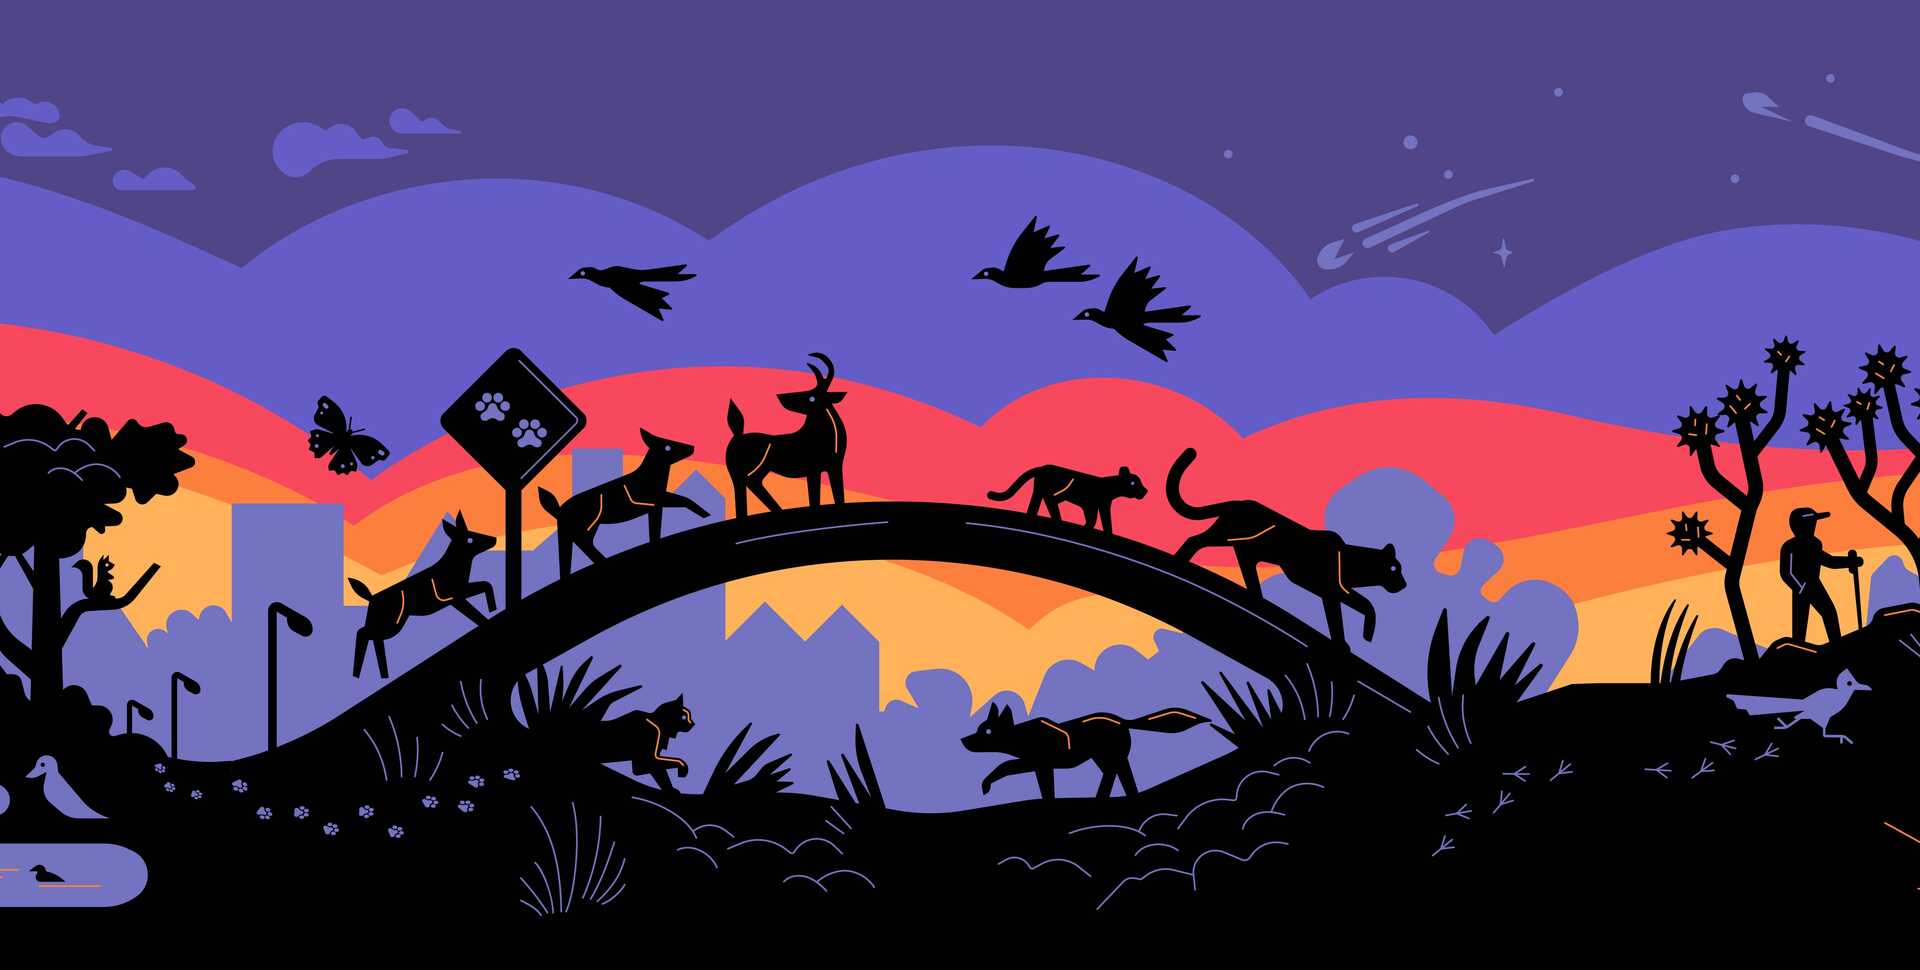 Colorful illustration of California wildlife and an urban skyline